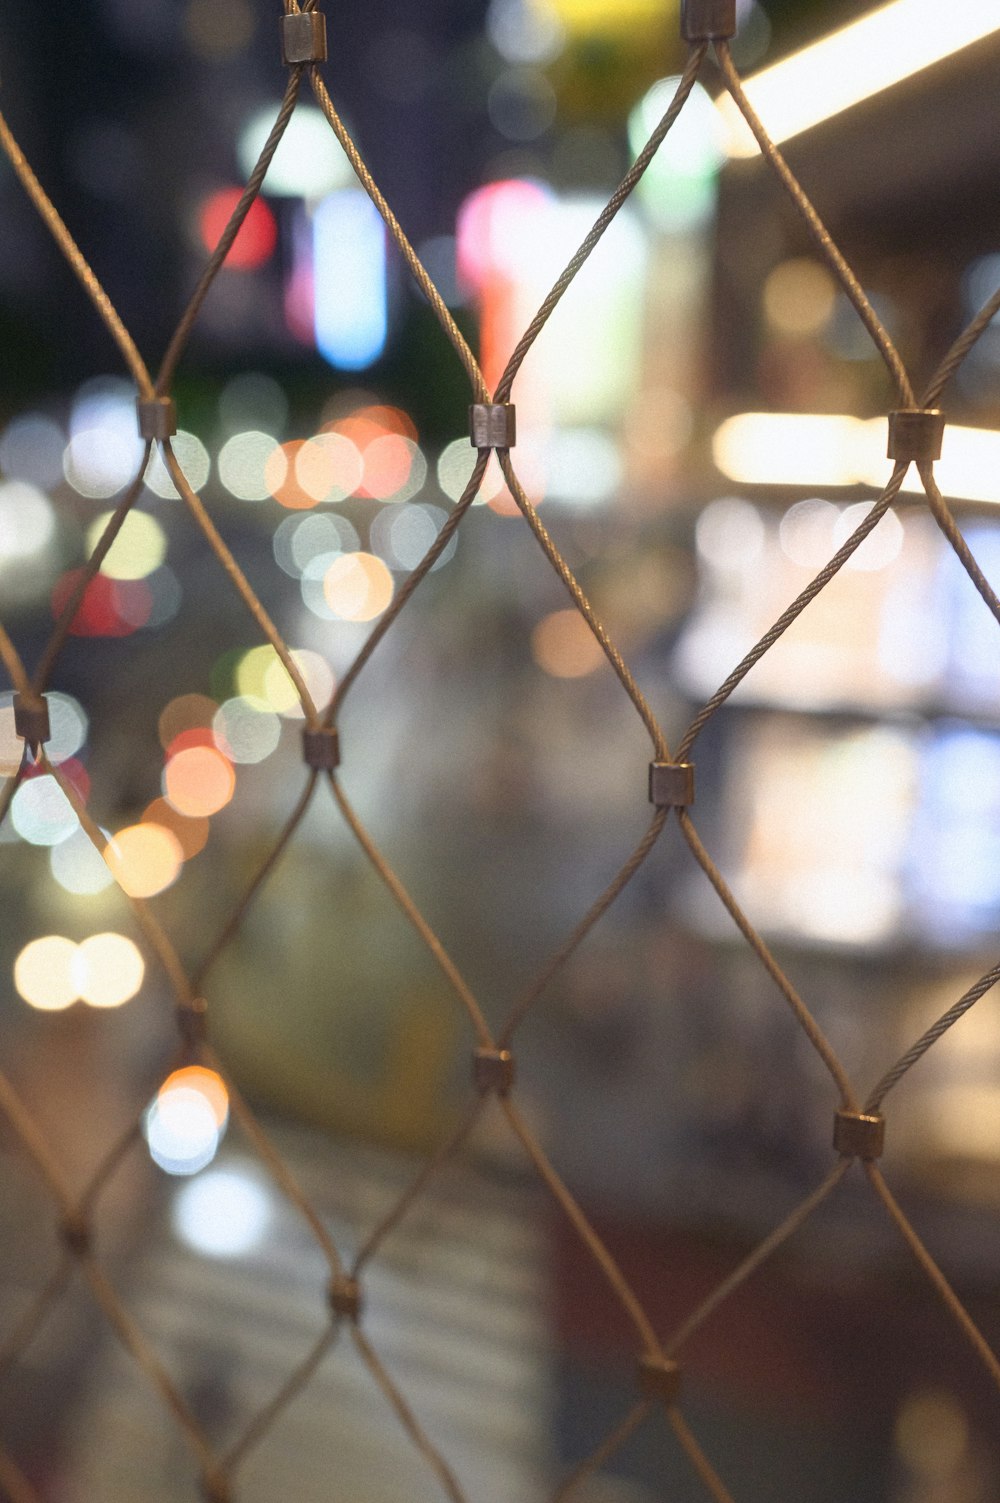 a close up of a chain link fence with blurry lights in the background